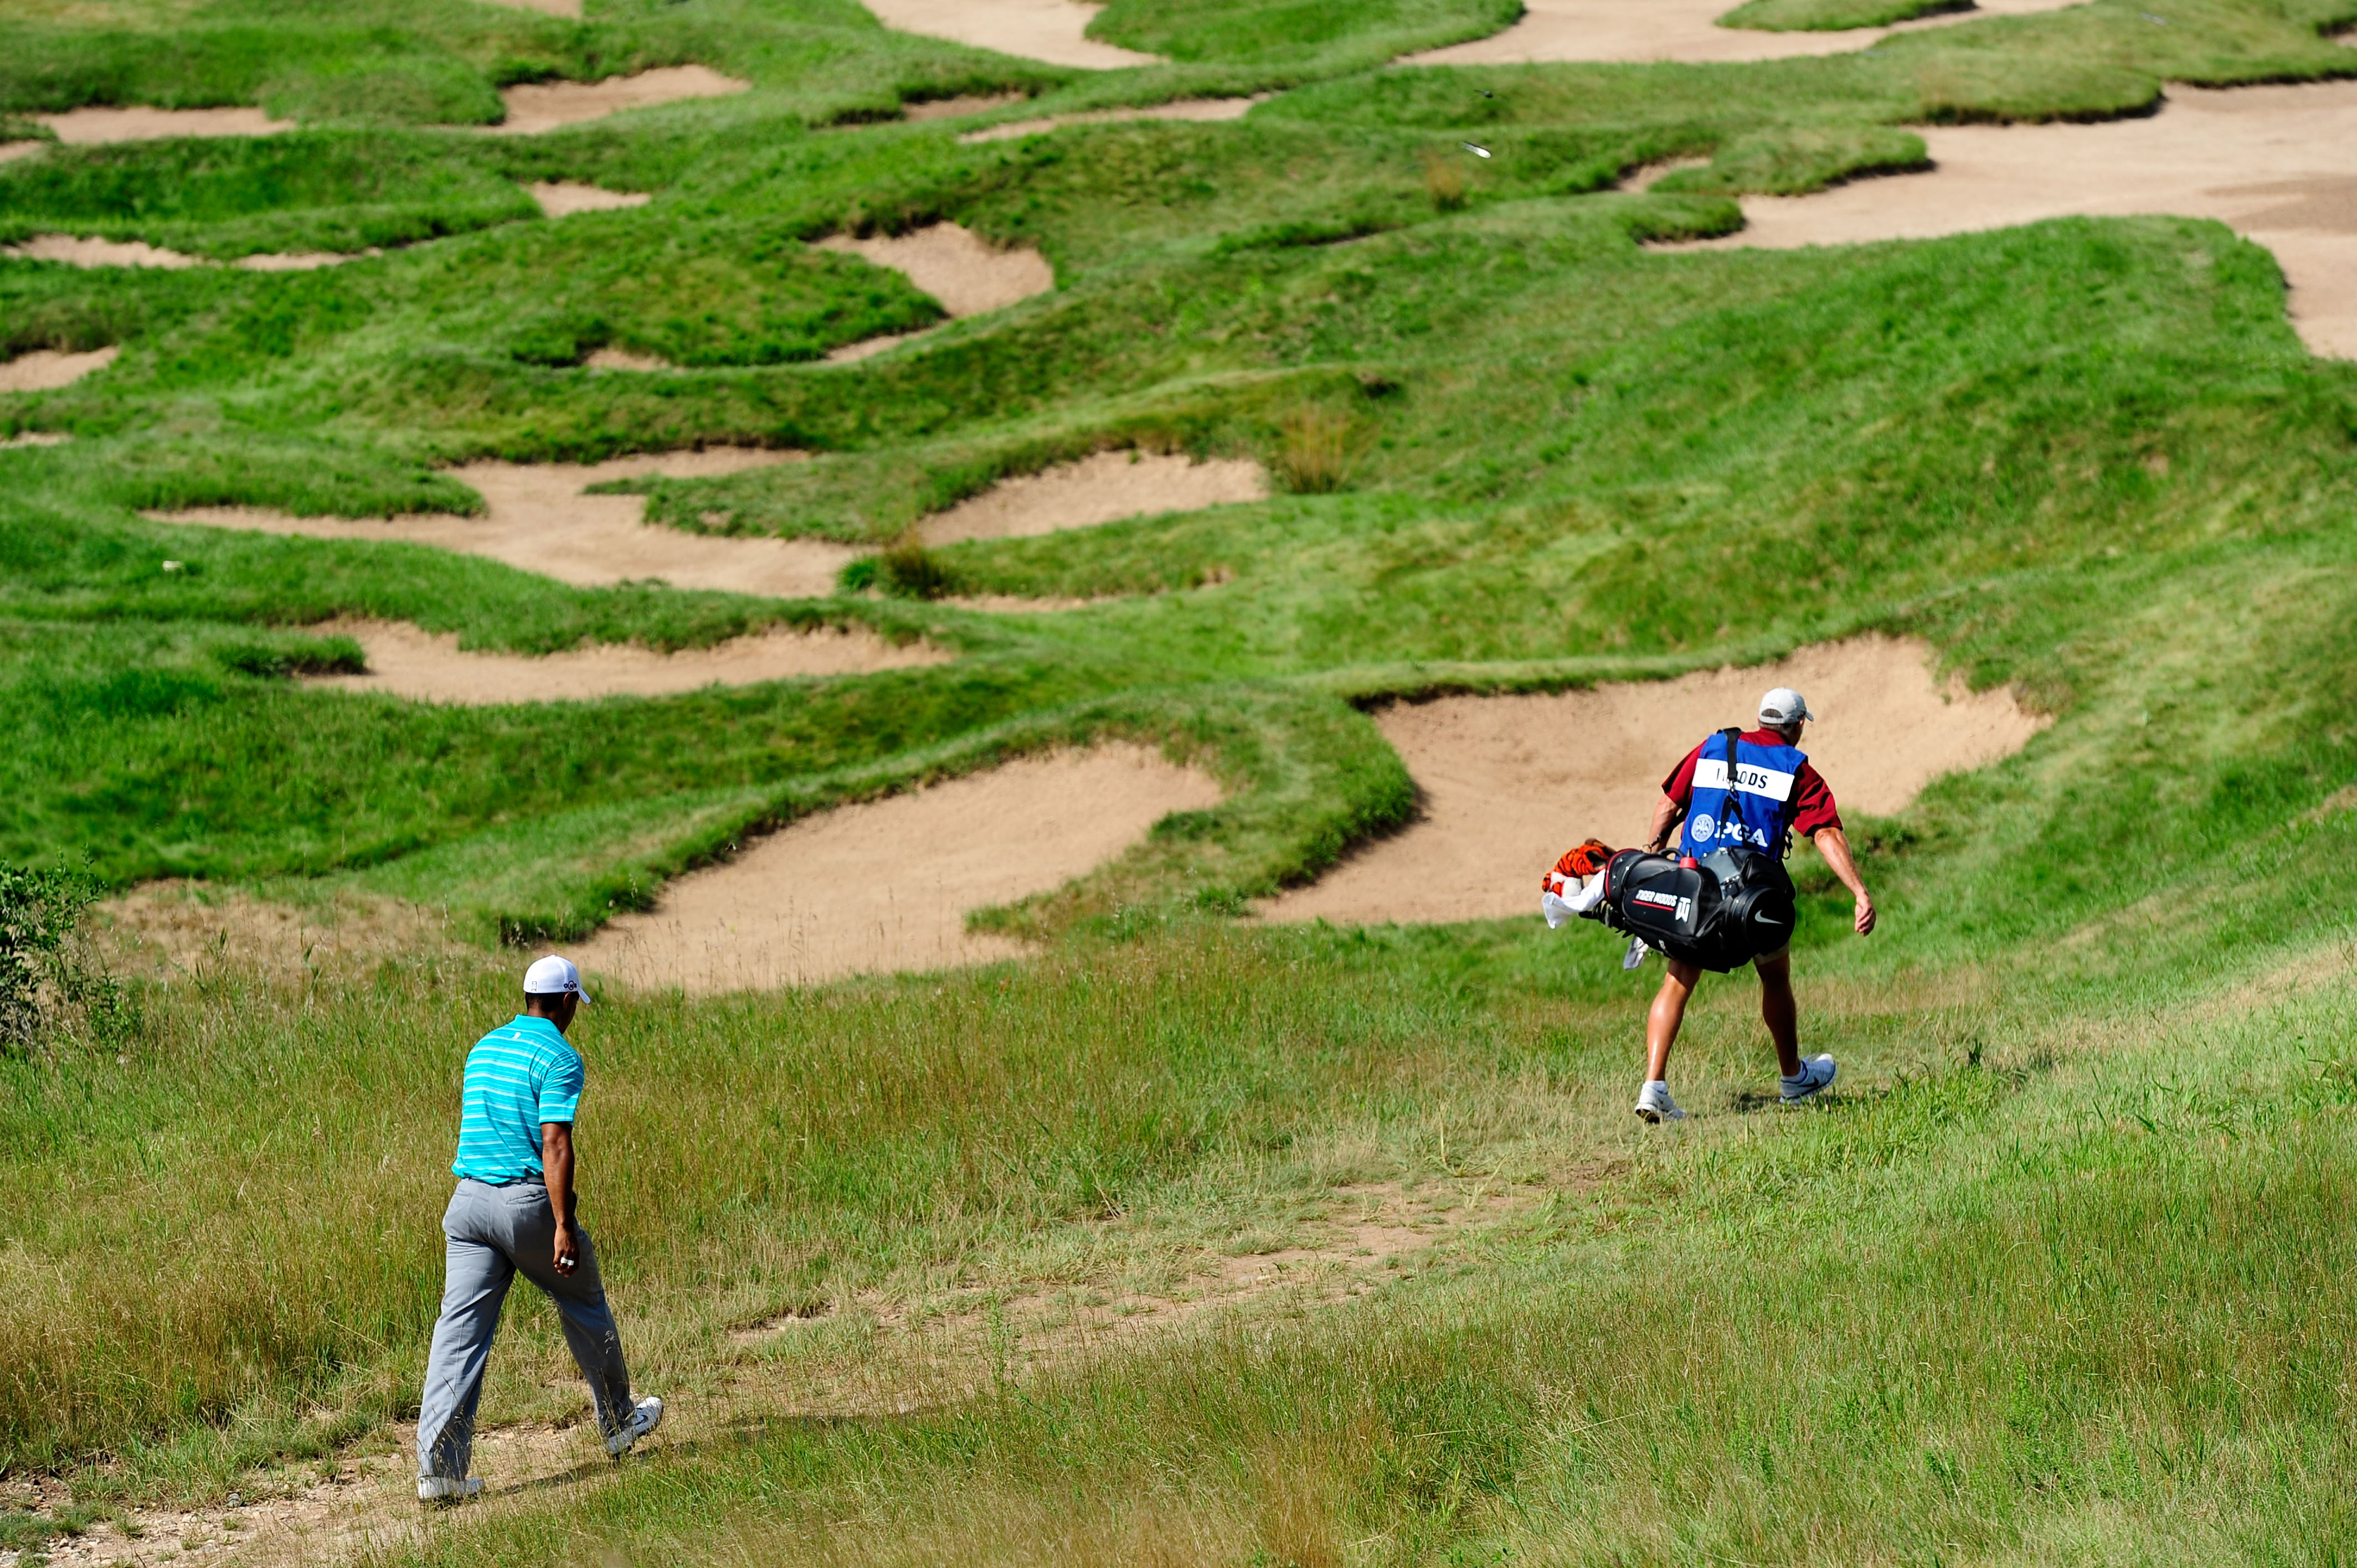 KOHLER, WI - AUGUST 14:  Tiger Woods walks with his caddie Steve Williams on the 18th hole during the continuation of the second round of the 92nd PGA Championship on the Straits Course at Whistling Straits on August 14, 2010 in Kohler, Wisconsin.  (Photo